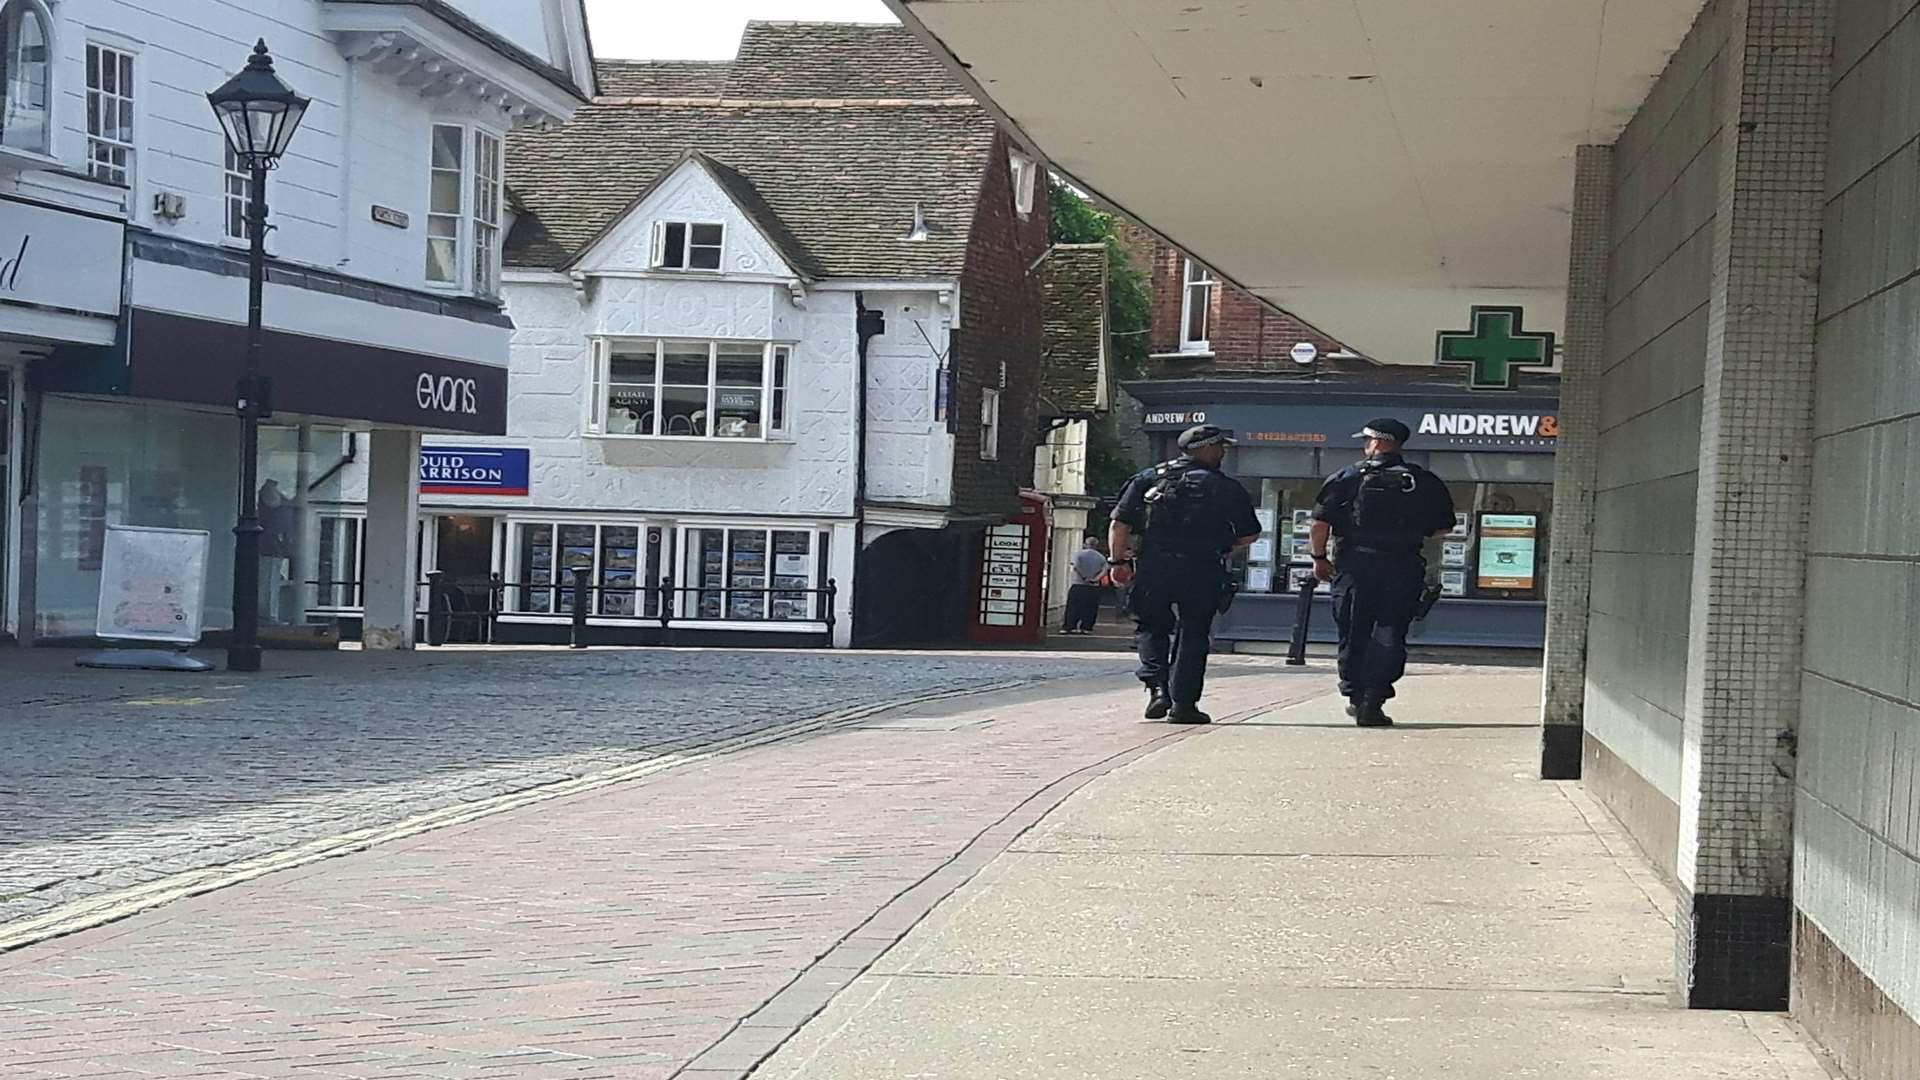 Armed police officers patrol streets in Ashford due to terrorism threat